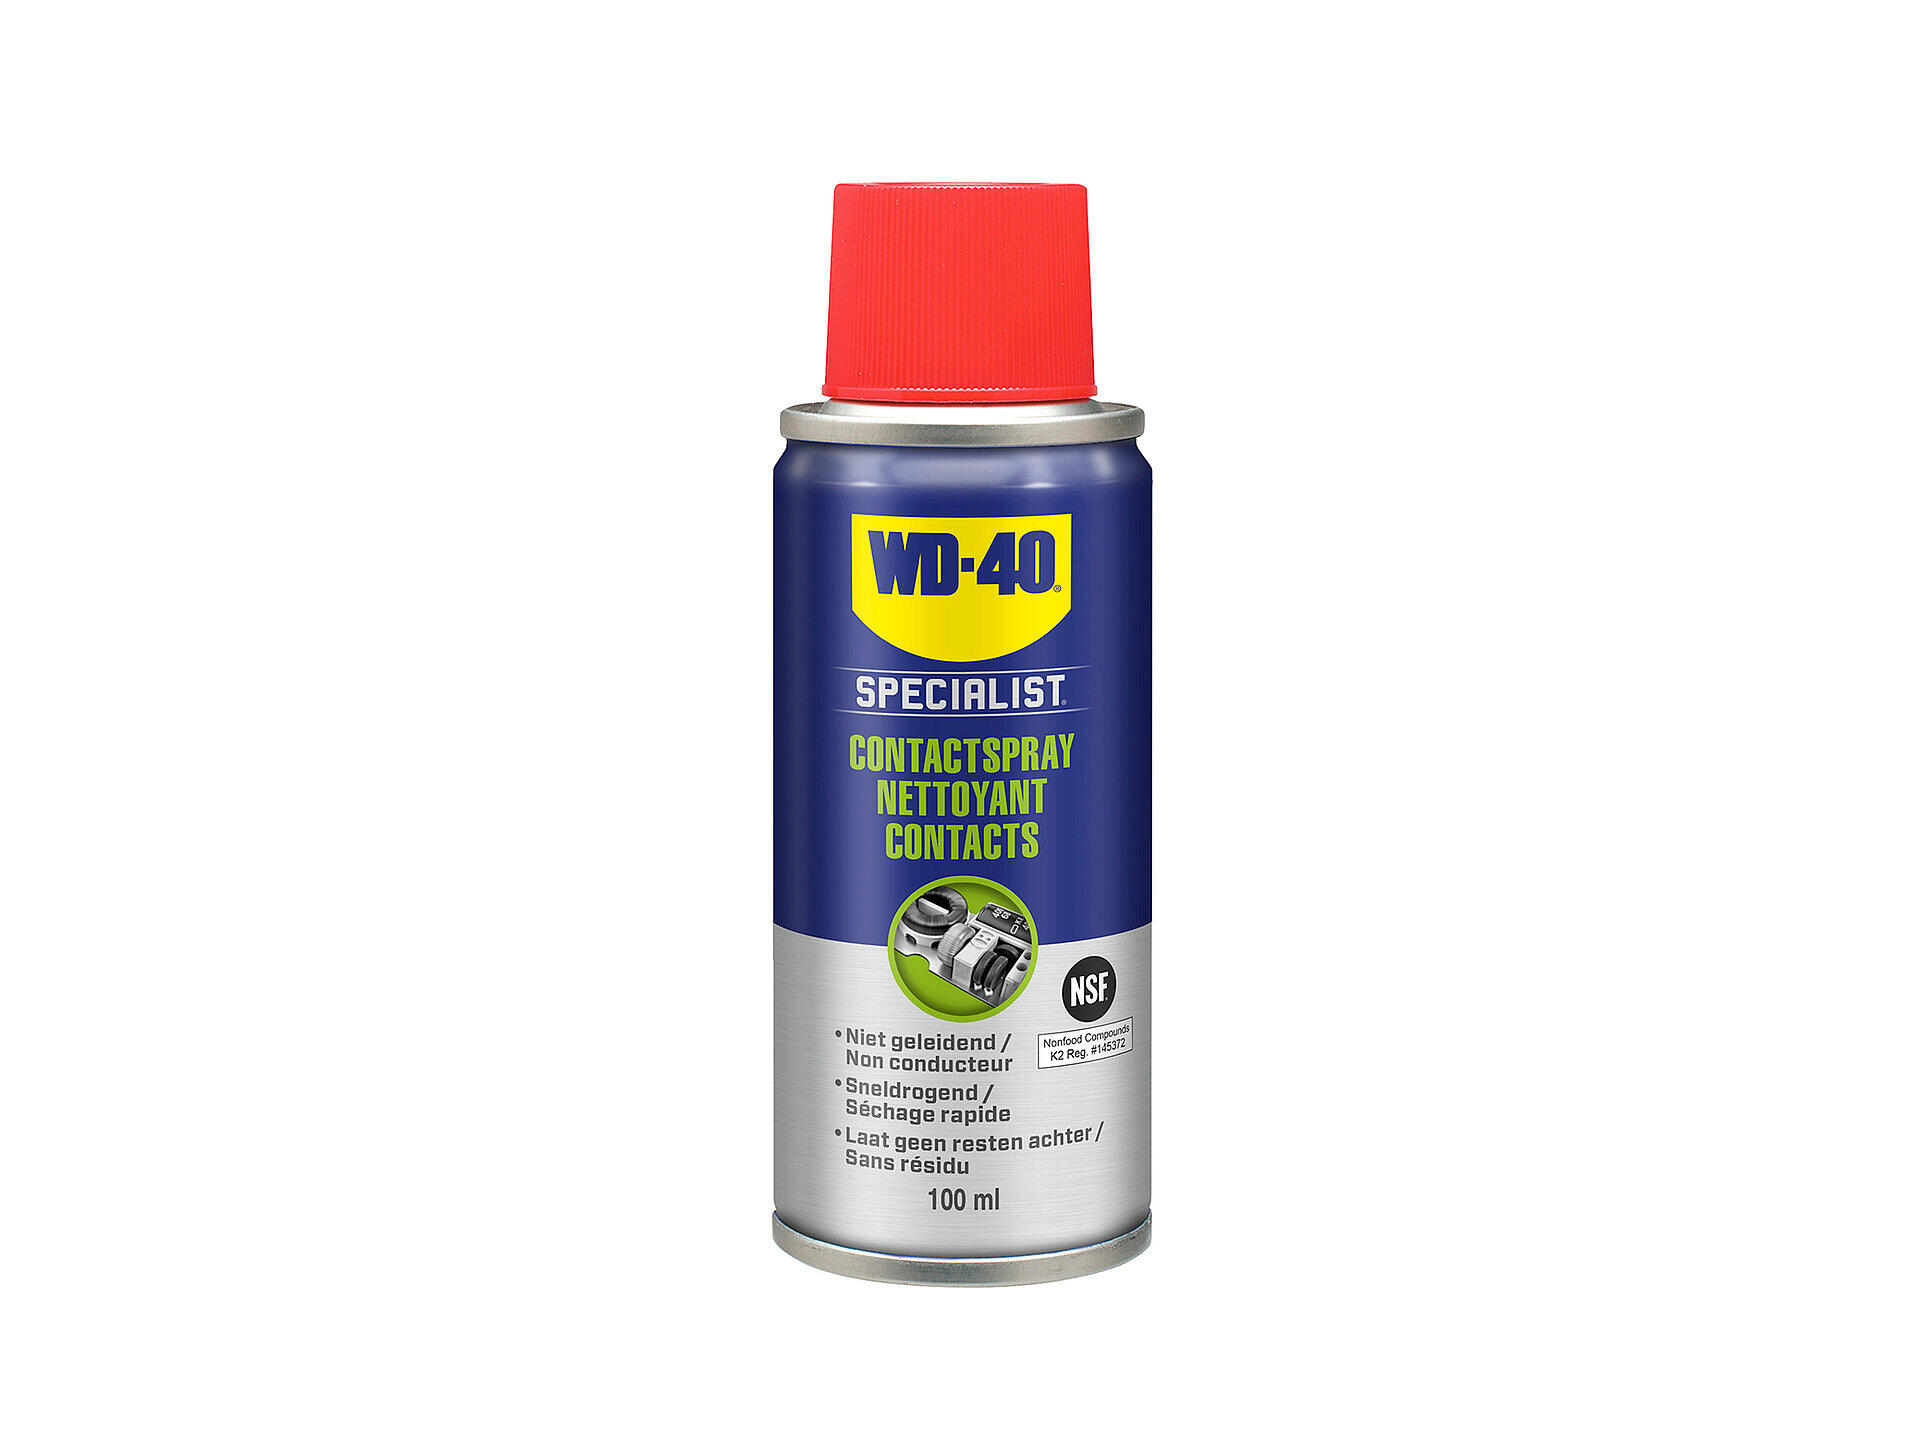 WD-40 Specialist spray nettoyant contacts 100ml